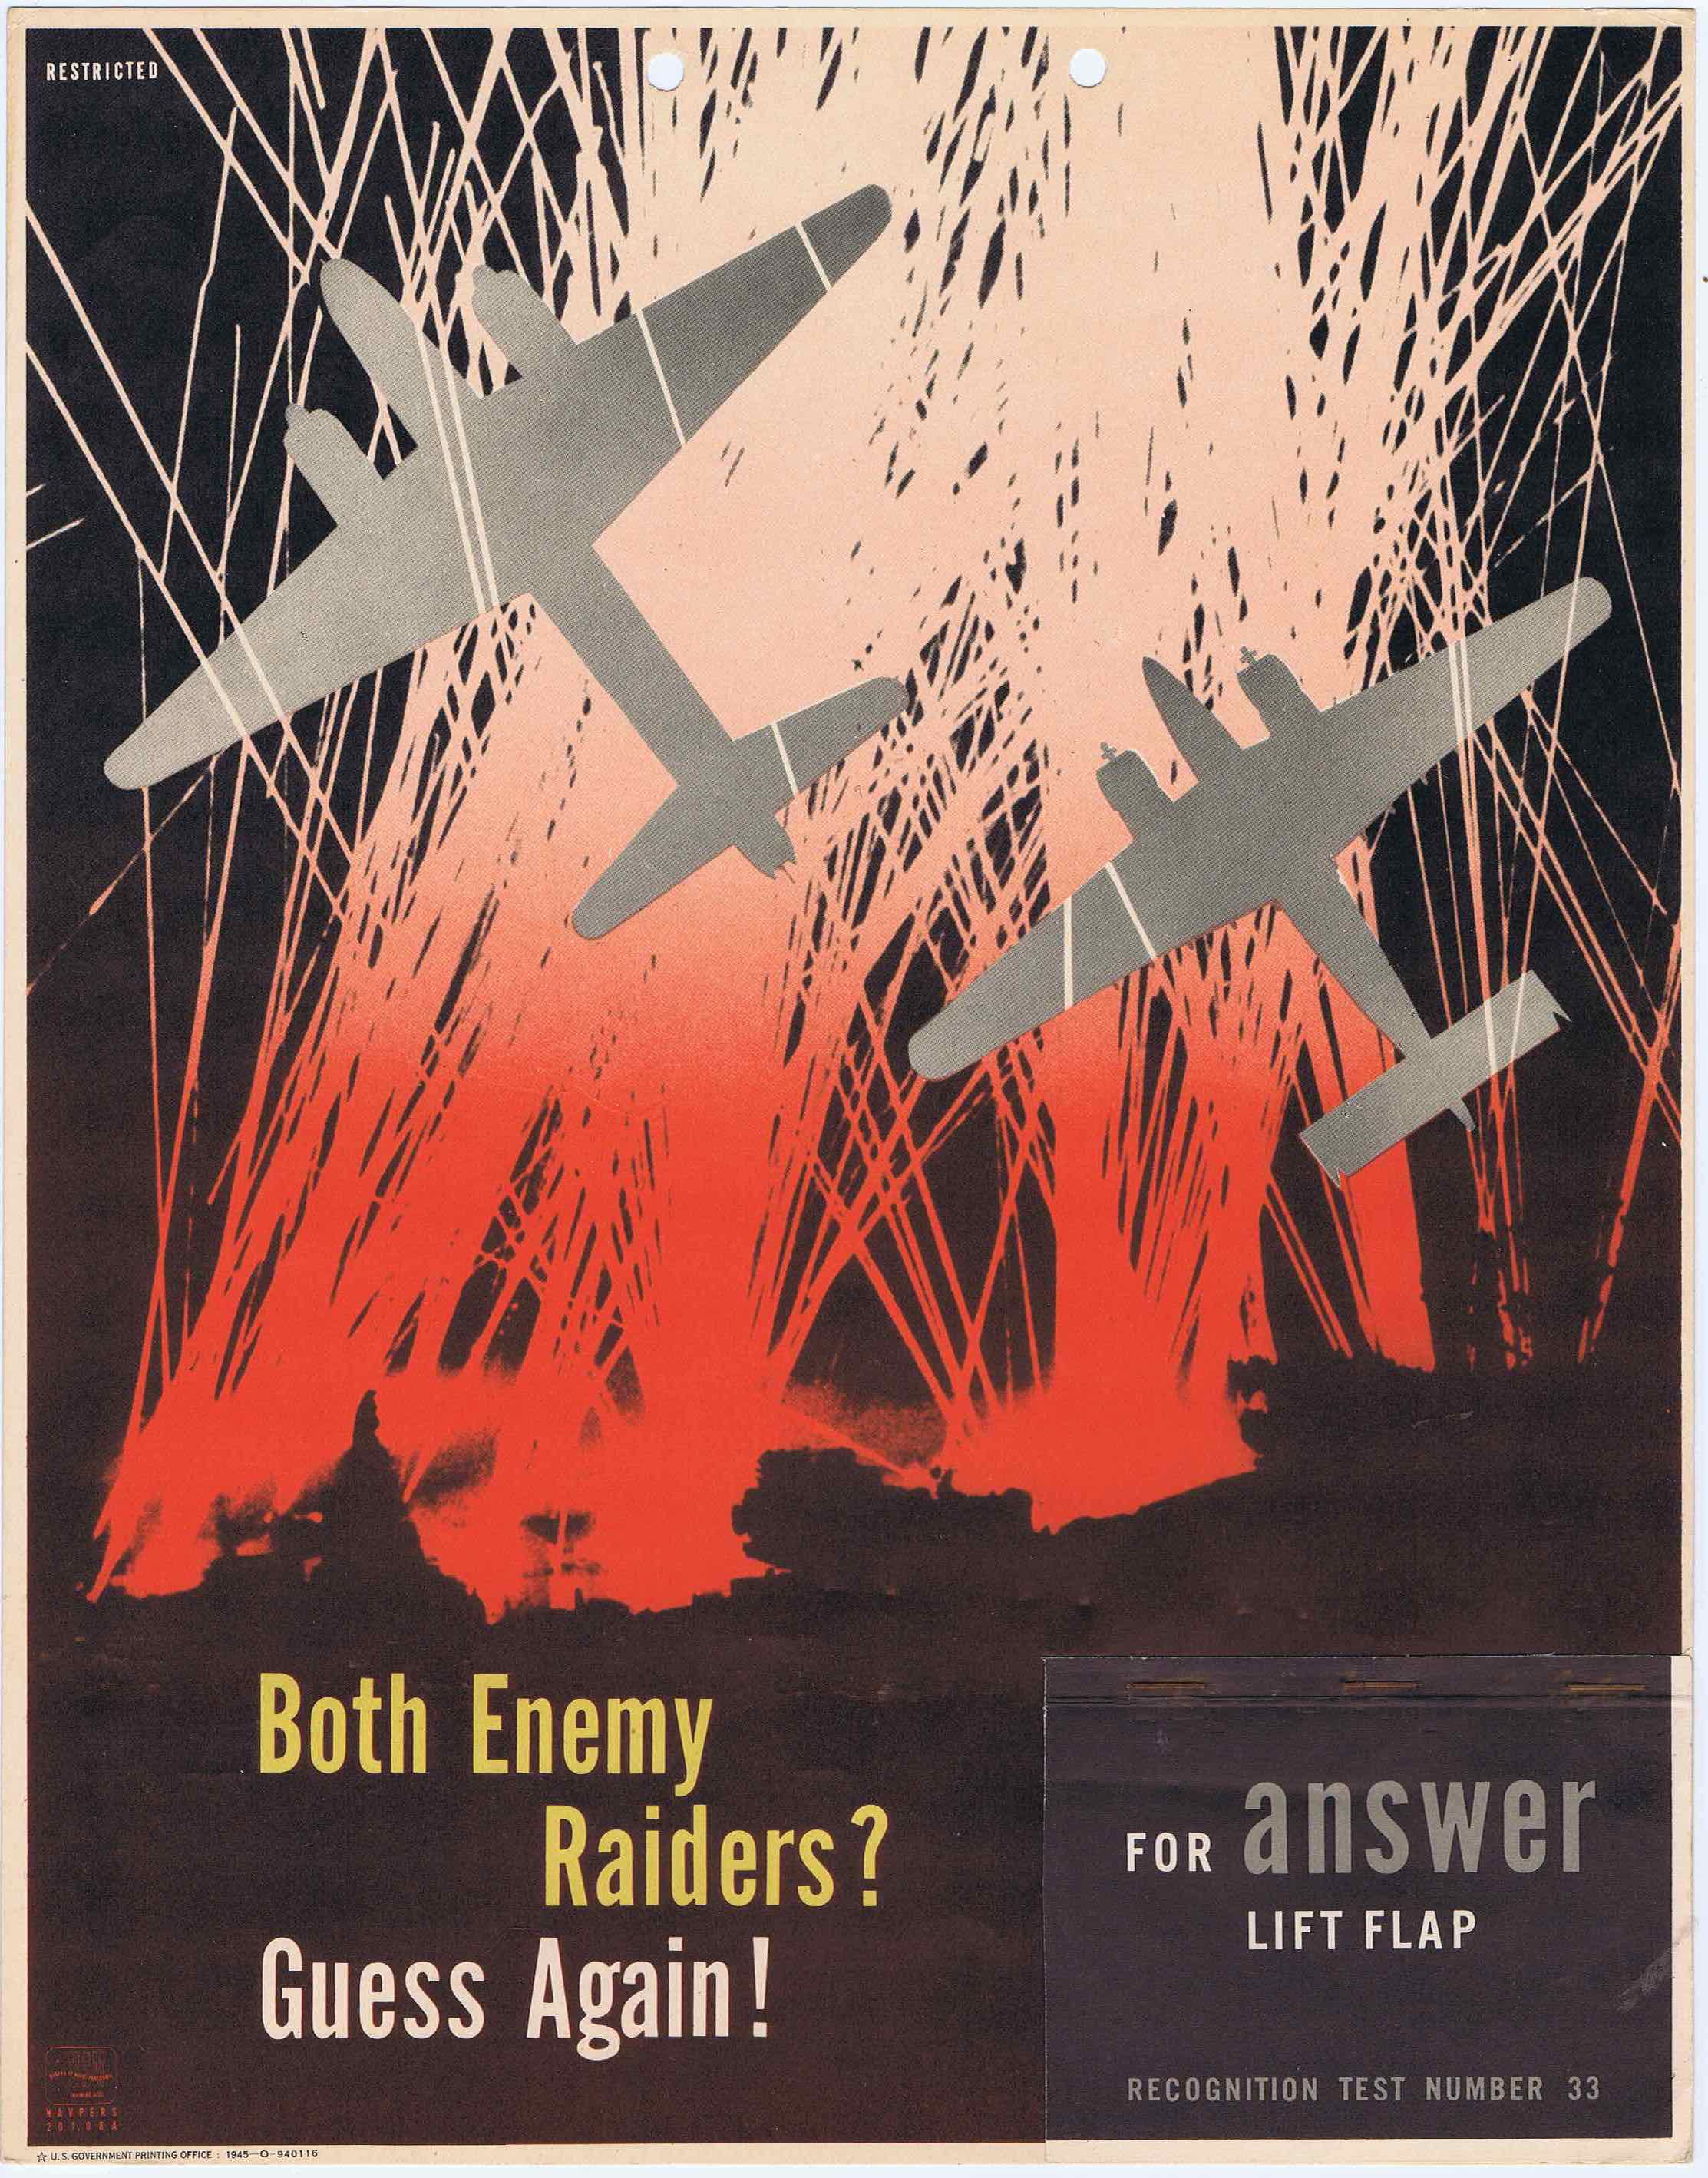 J319	BOTH ENEMY RAIDERS? GUESS AGAIN - U.S. ARMY AIR FORCE RECOGNITION POSTER